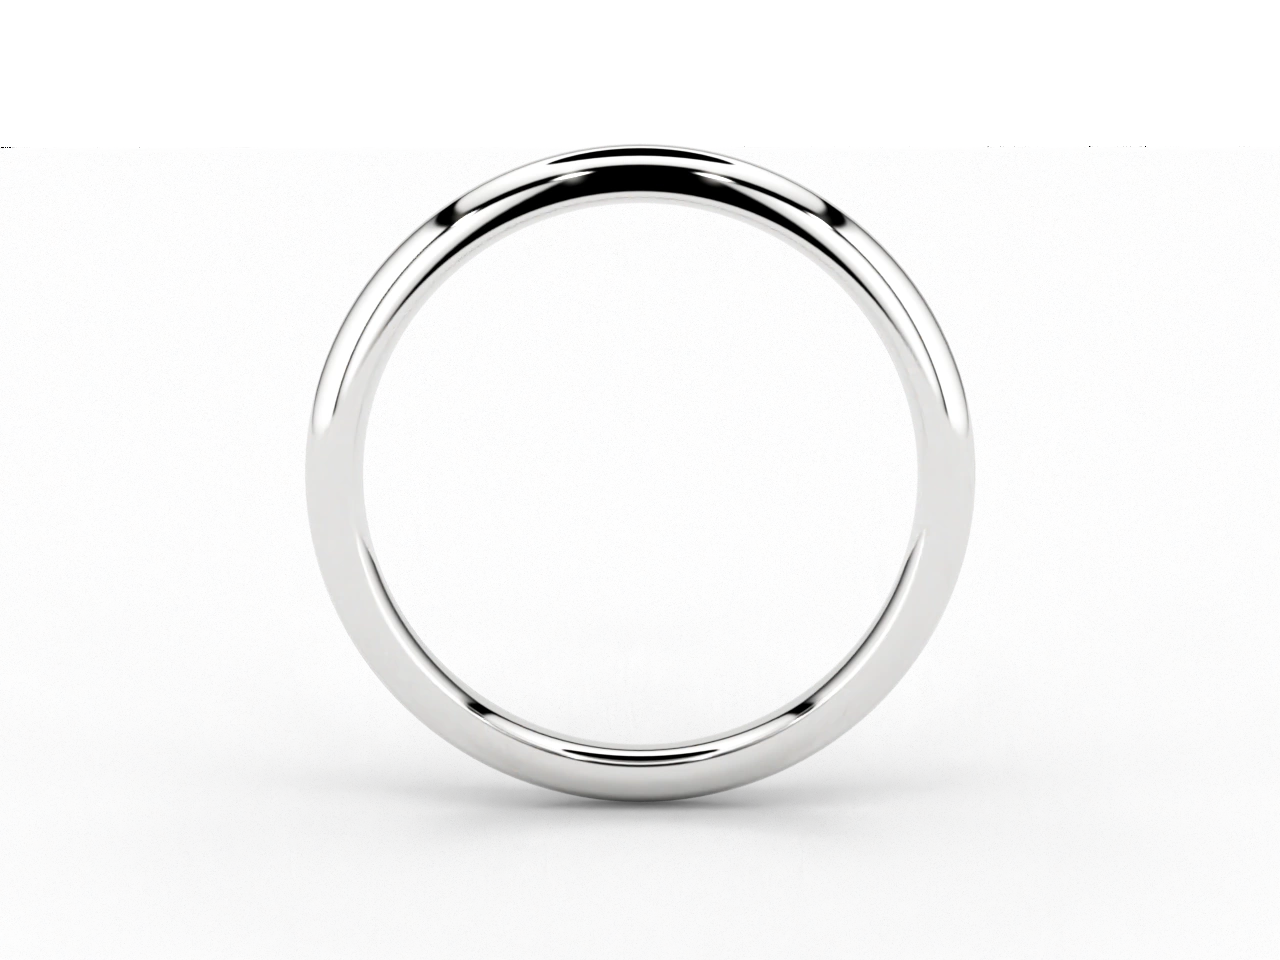 Classic Wedding Band in 2mm 18ct White Gold